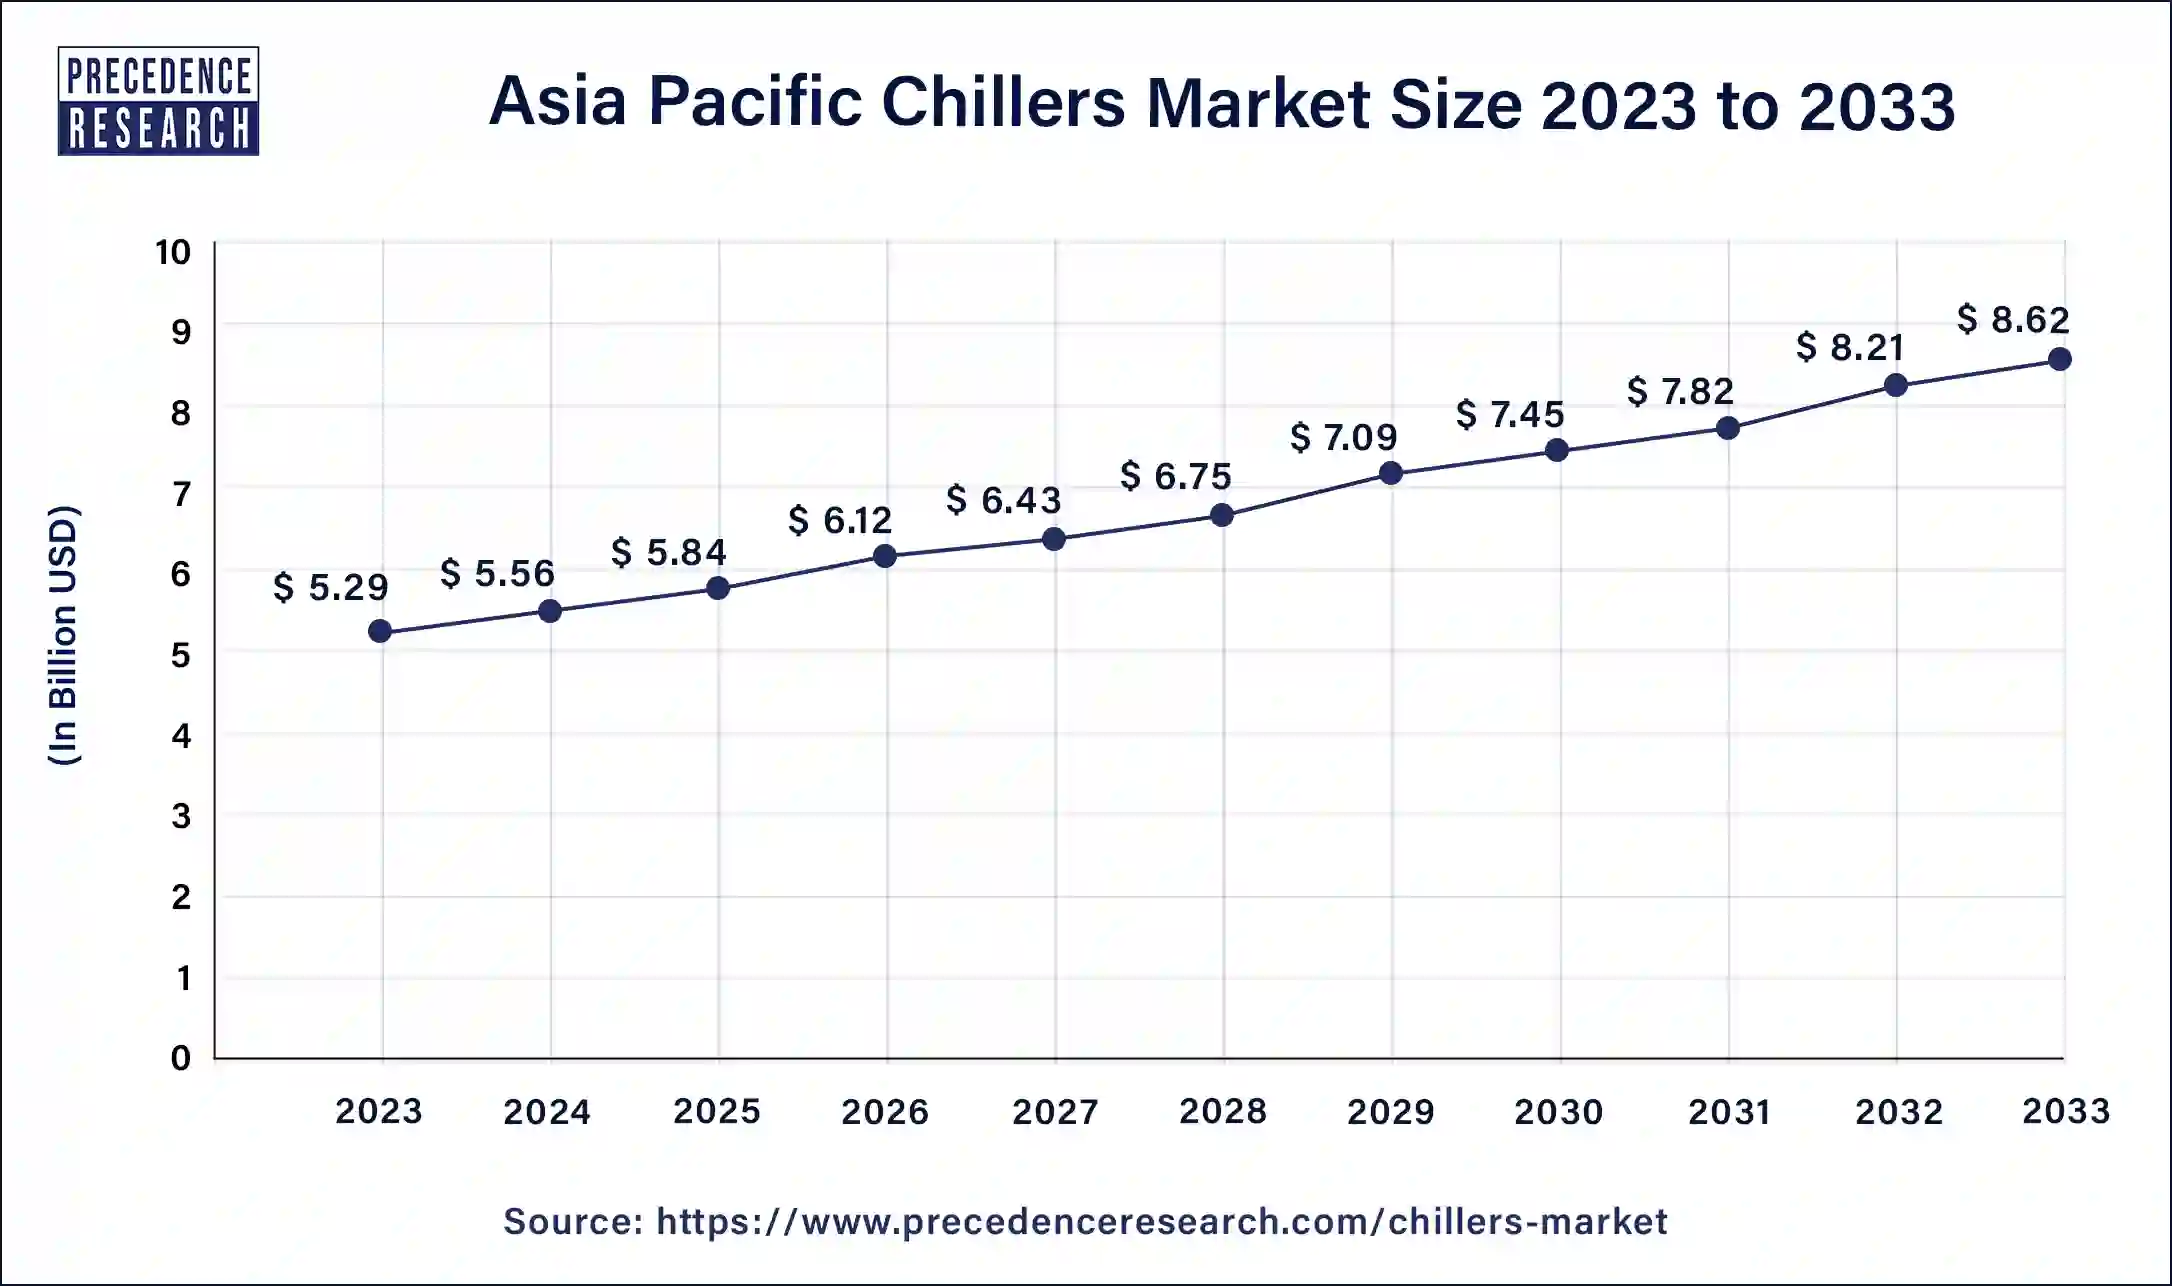 Asia Pacific Chillers Market Size 2024 to 2033